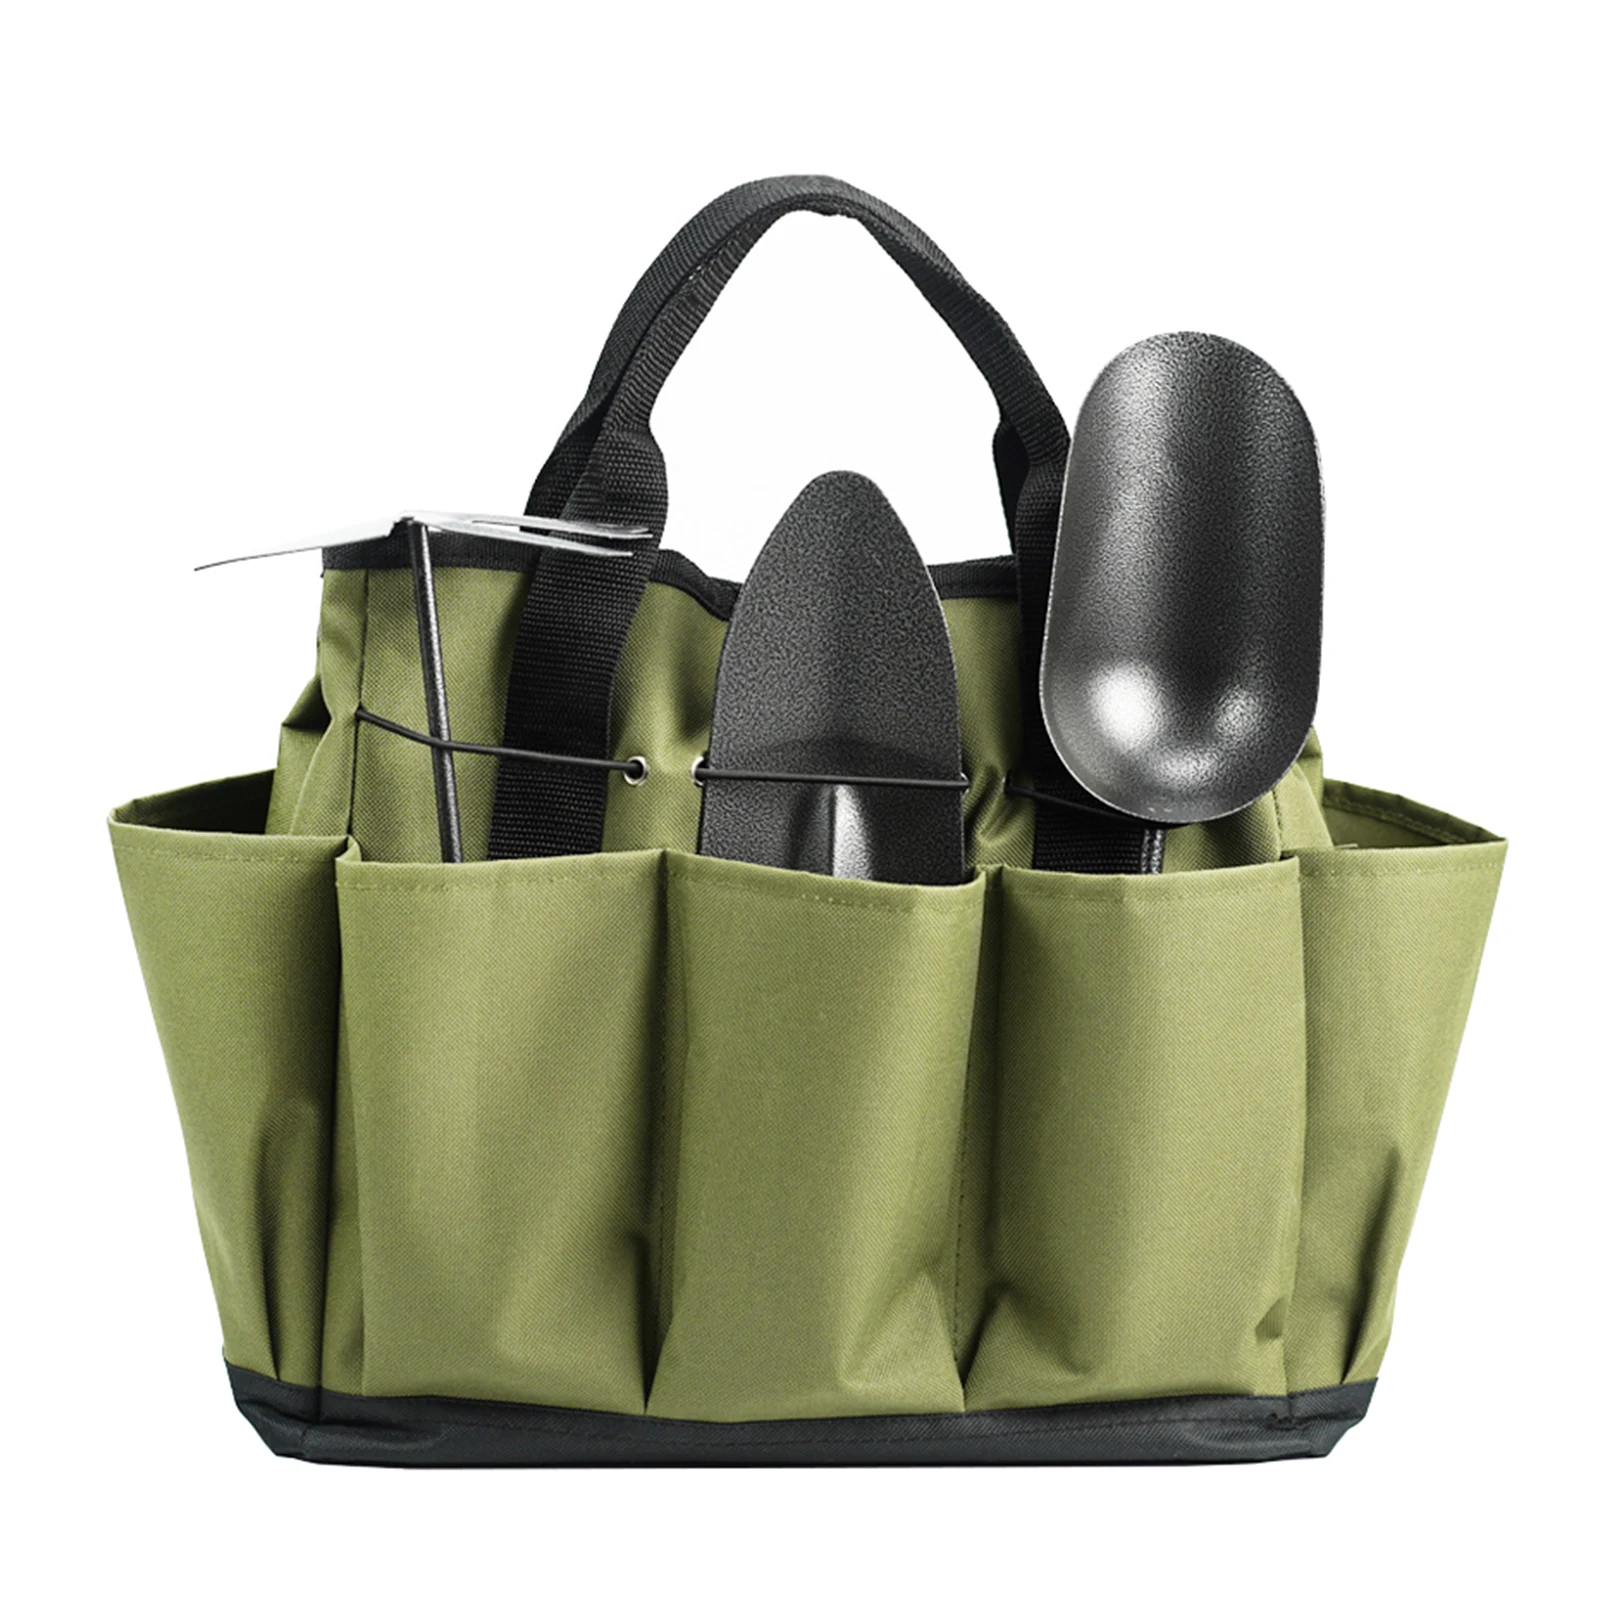 Deluxe Garden Tool Storage Bag and Home Organize Housolution Gardening Tote Bag 